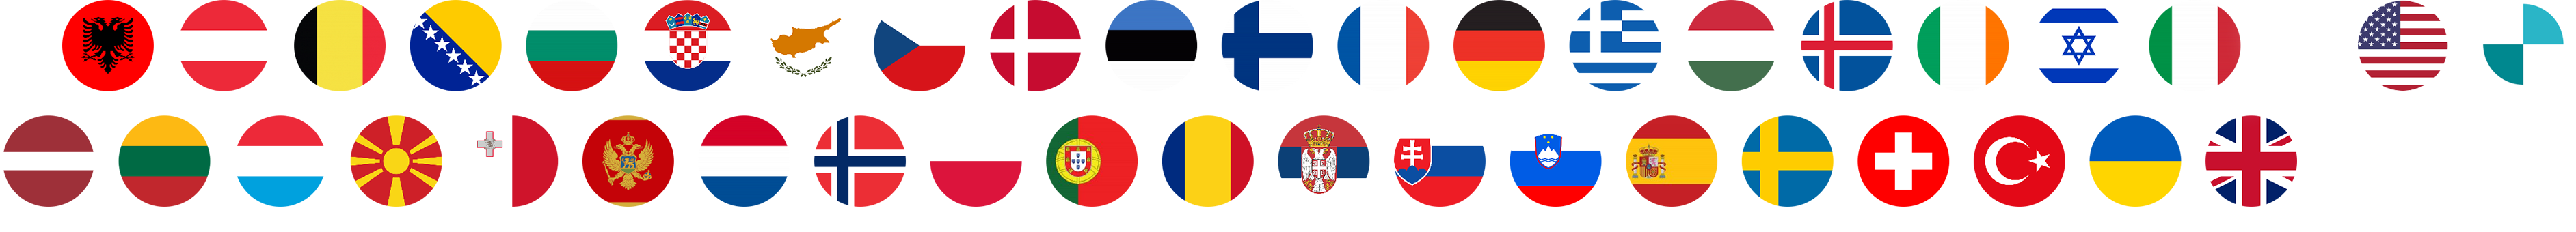 Country flags of all participating countries in a 2x12 grid